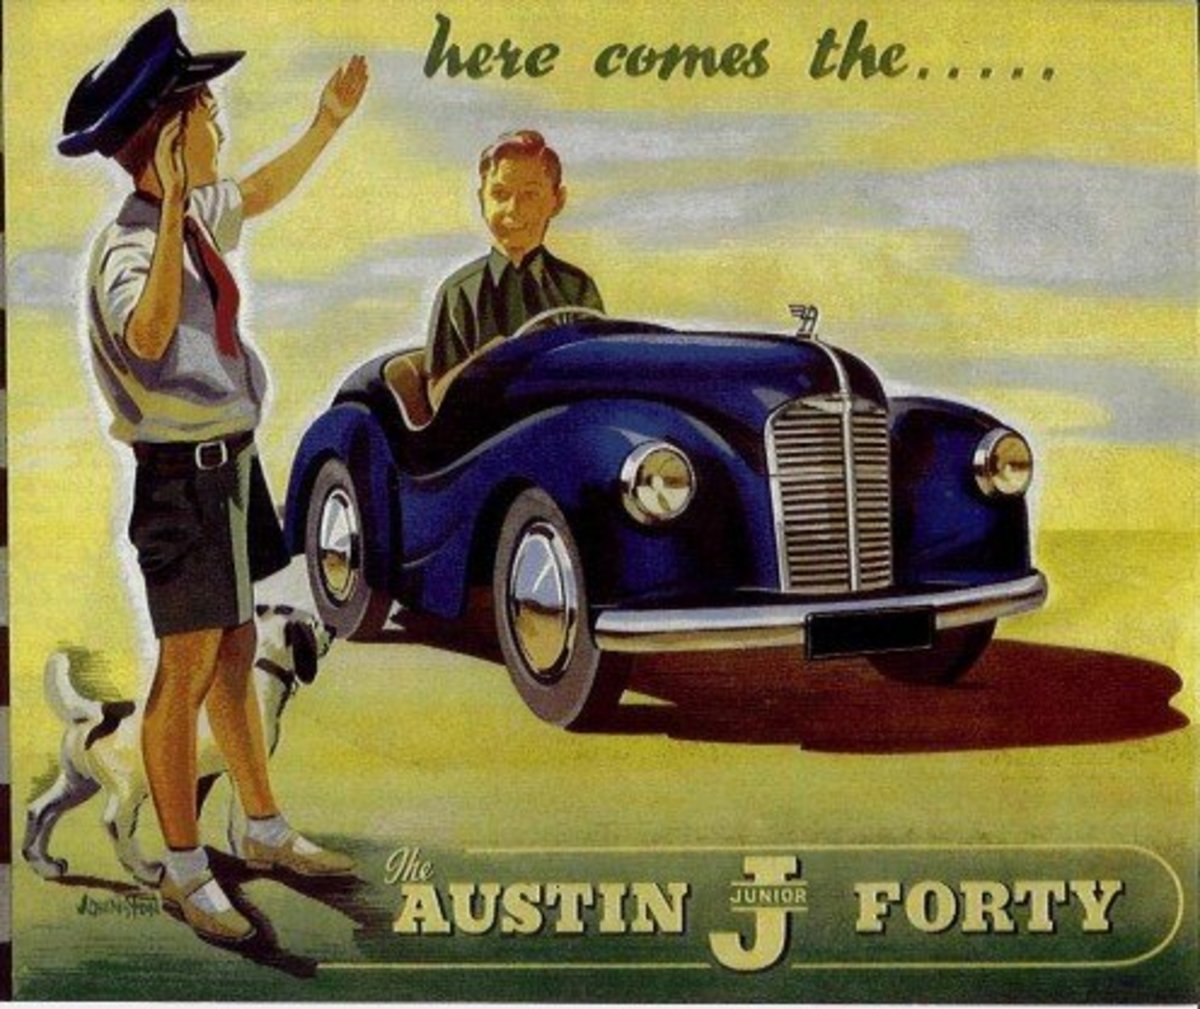 Image from Austin Works.